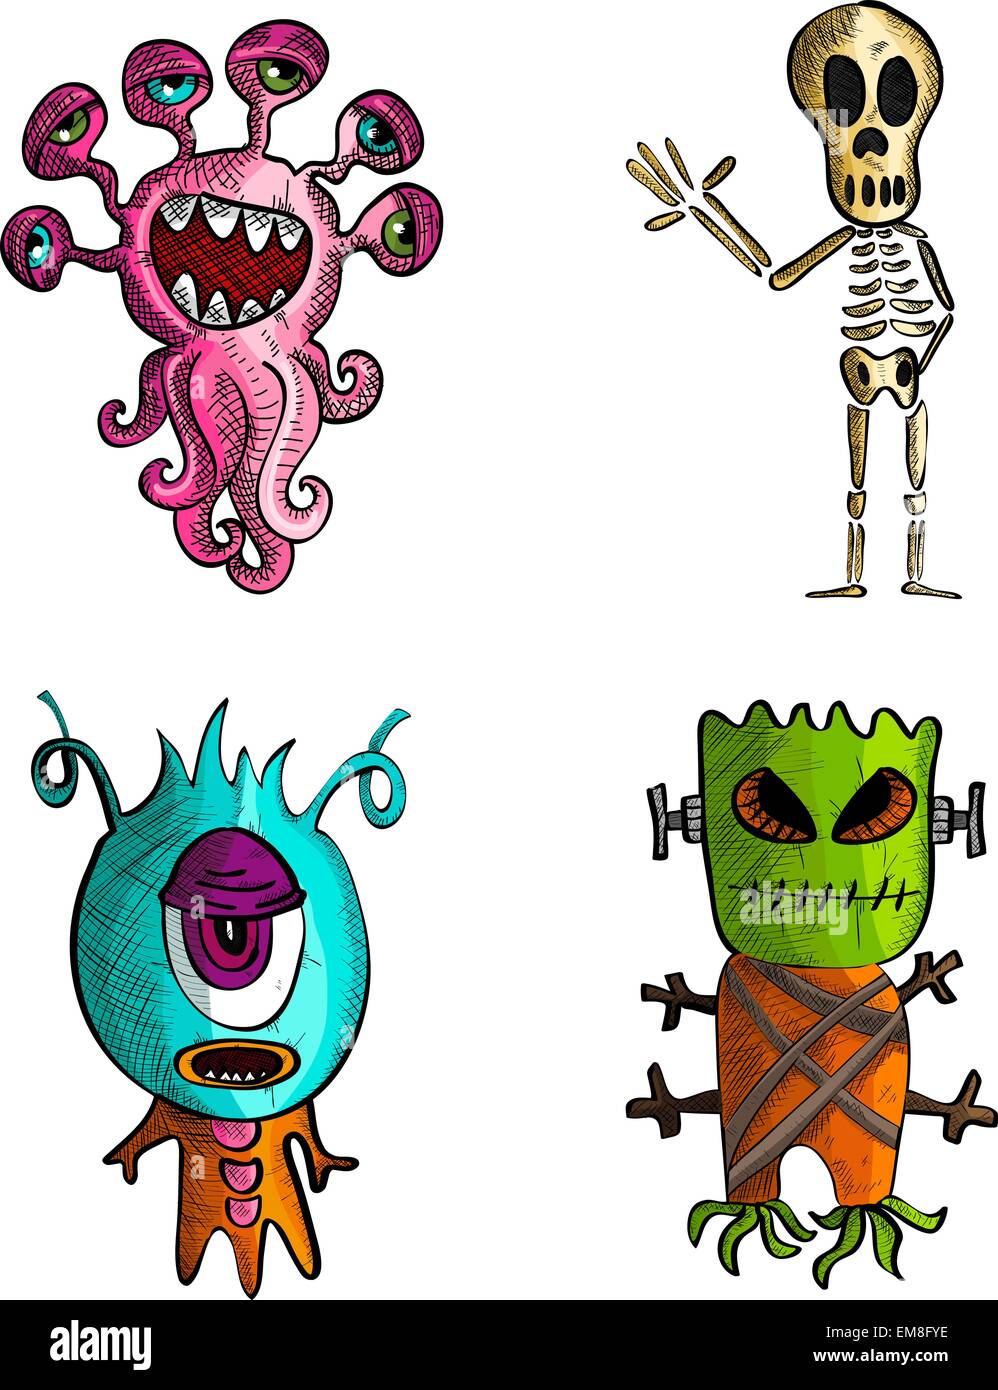 Halloween monsters isolated sketch style creatures set Stock Vector